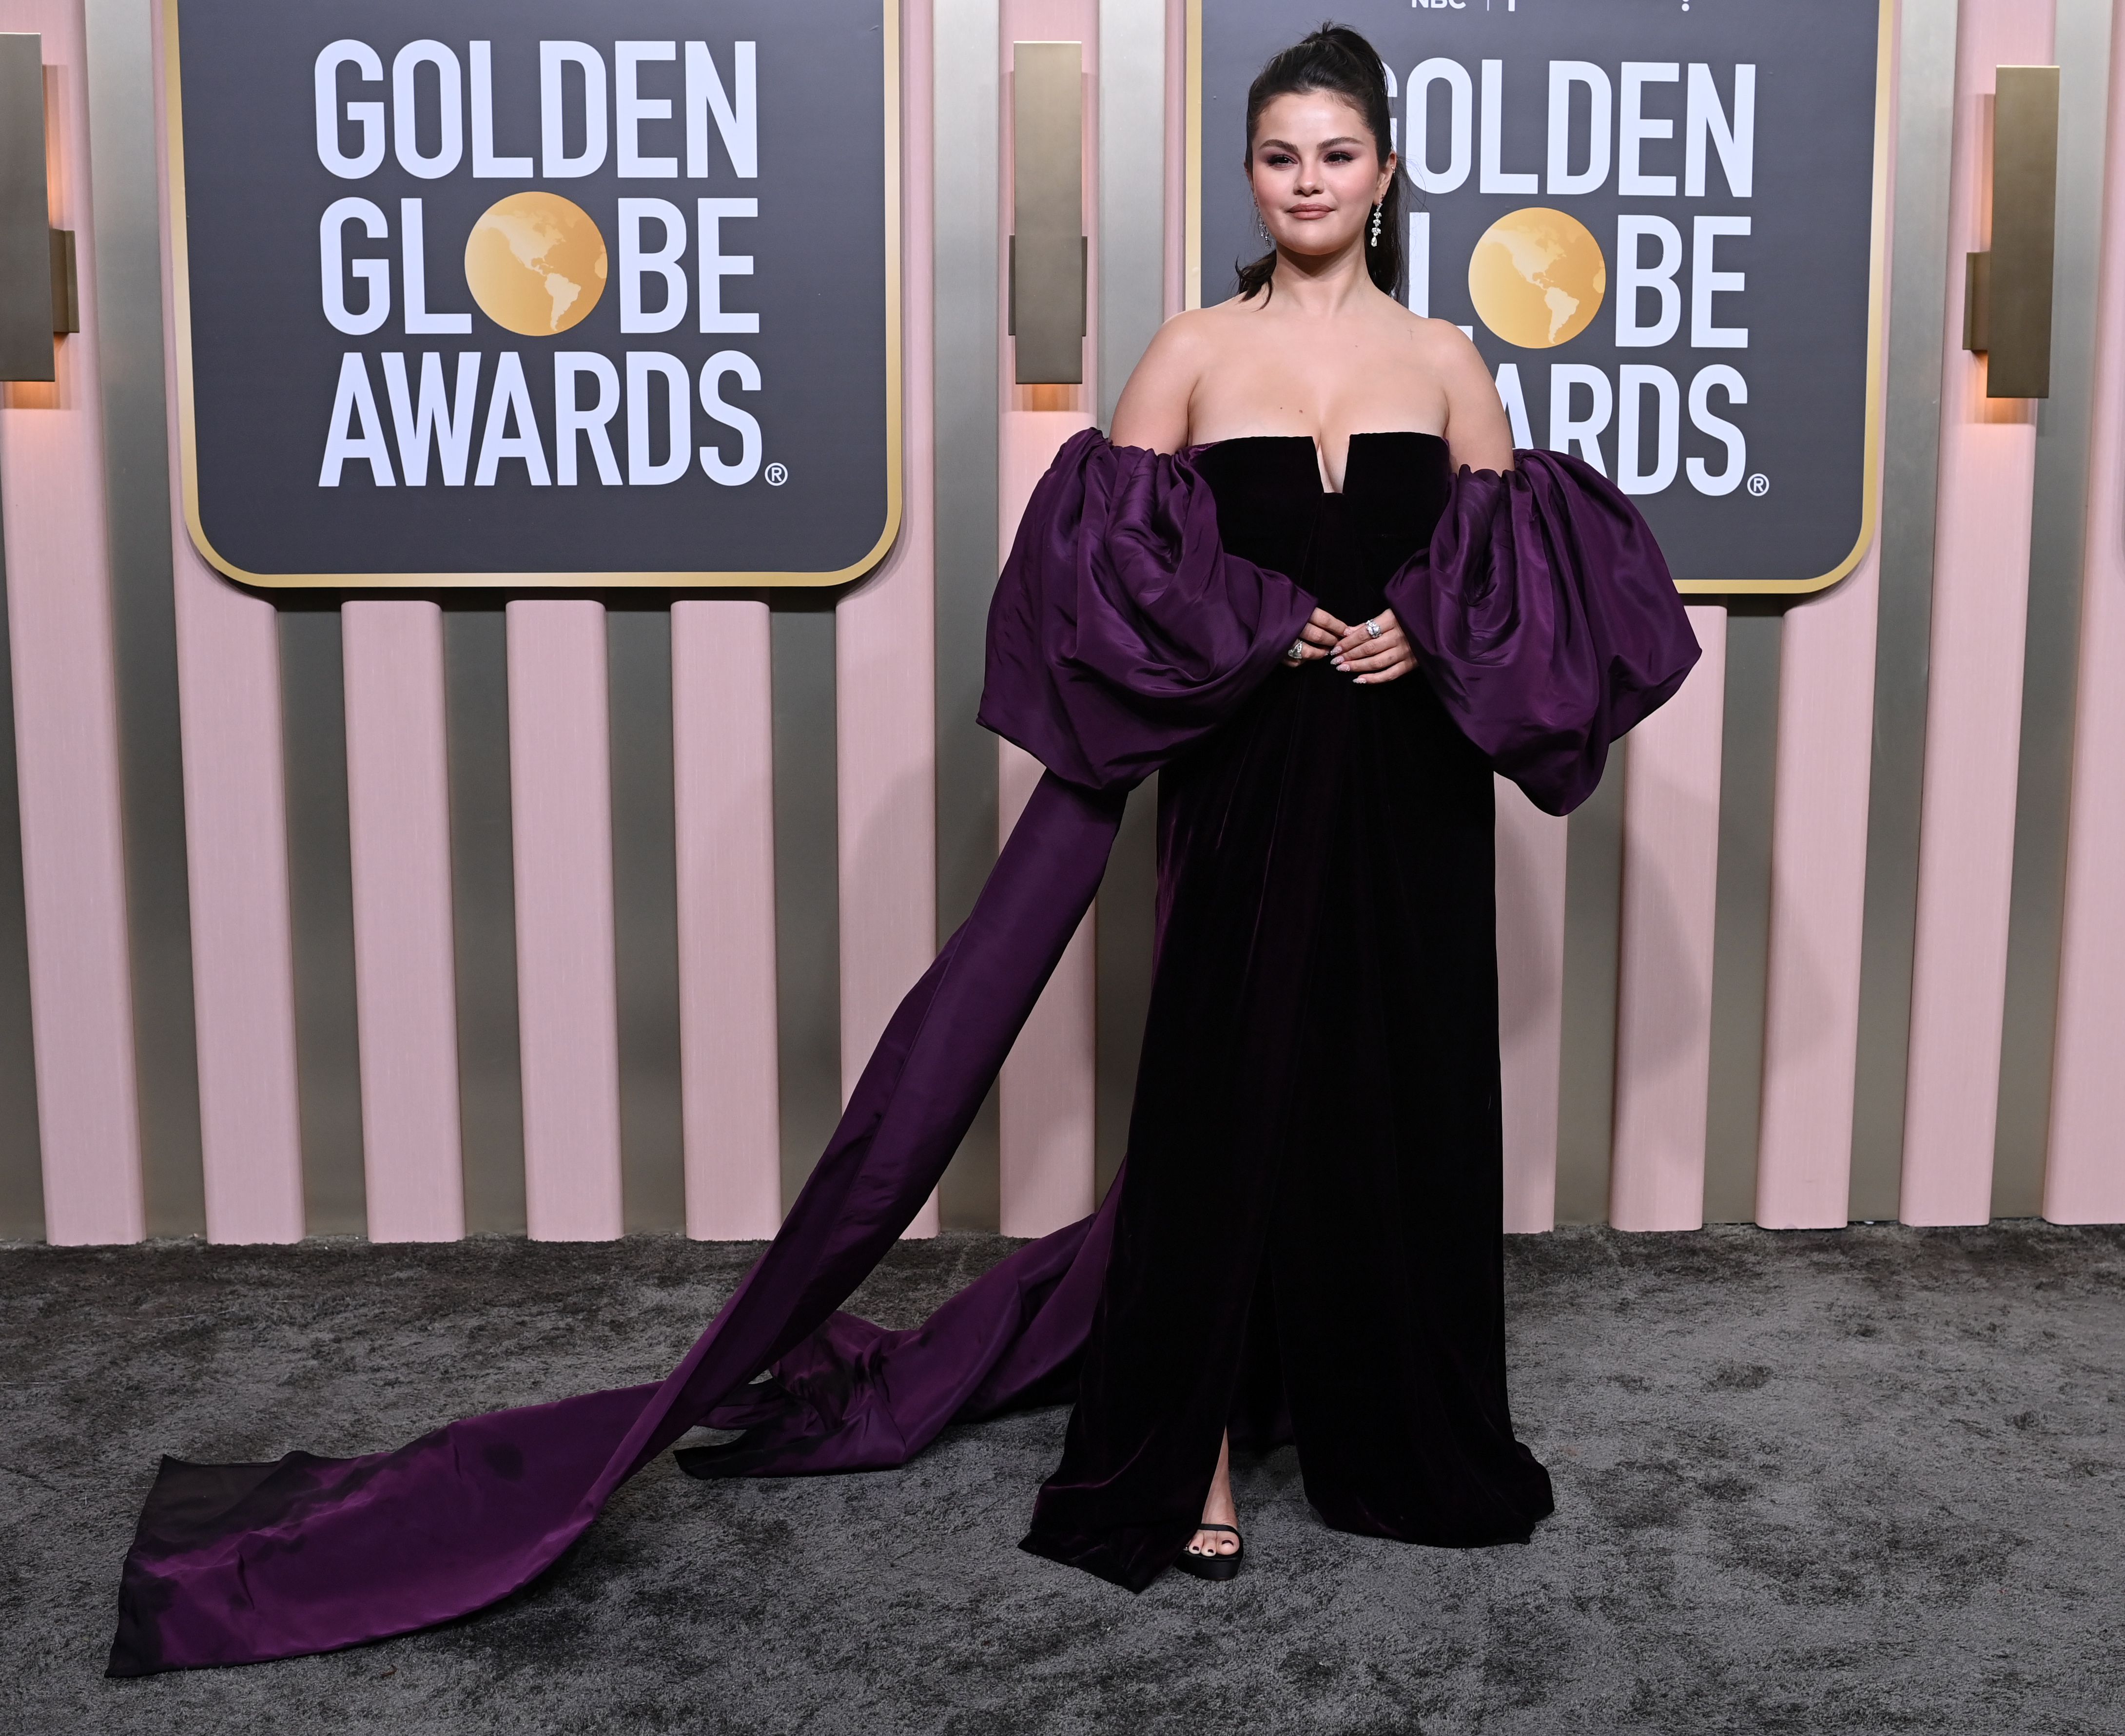 Selena Gomez's Best Outfits: Her Most Iconic Looks Yet